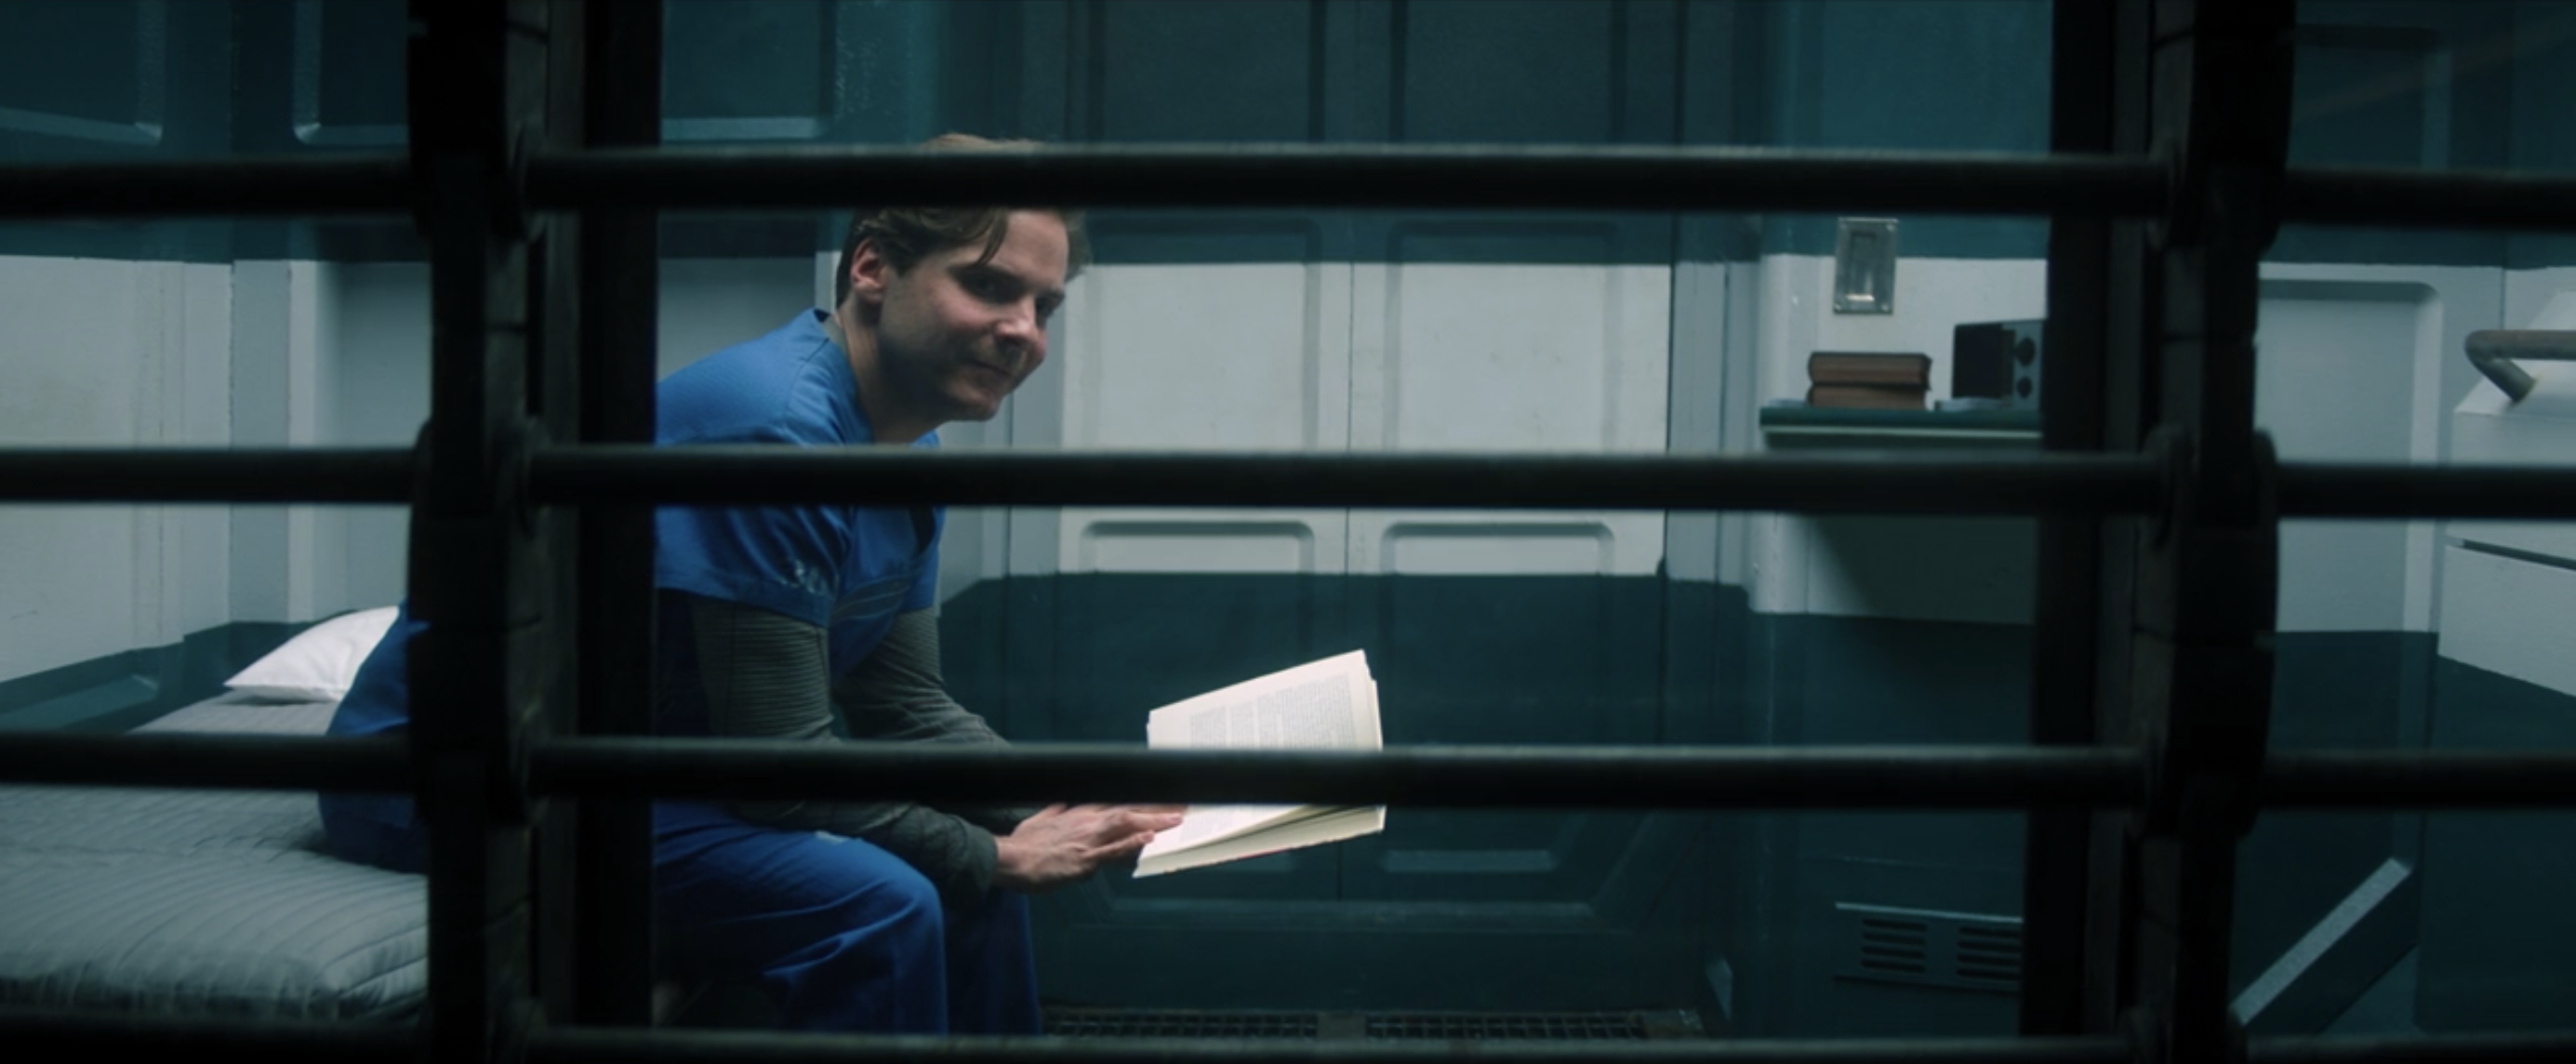 Zemo sitting on his bed in his prison cell reading a book and smiling